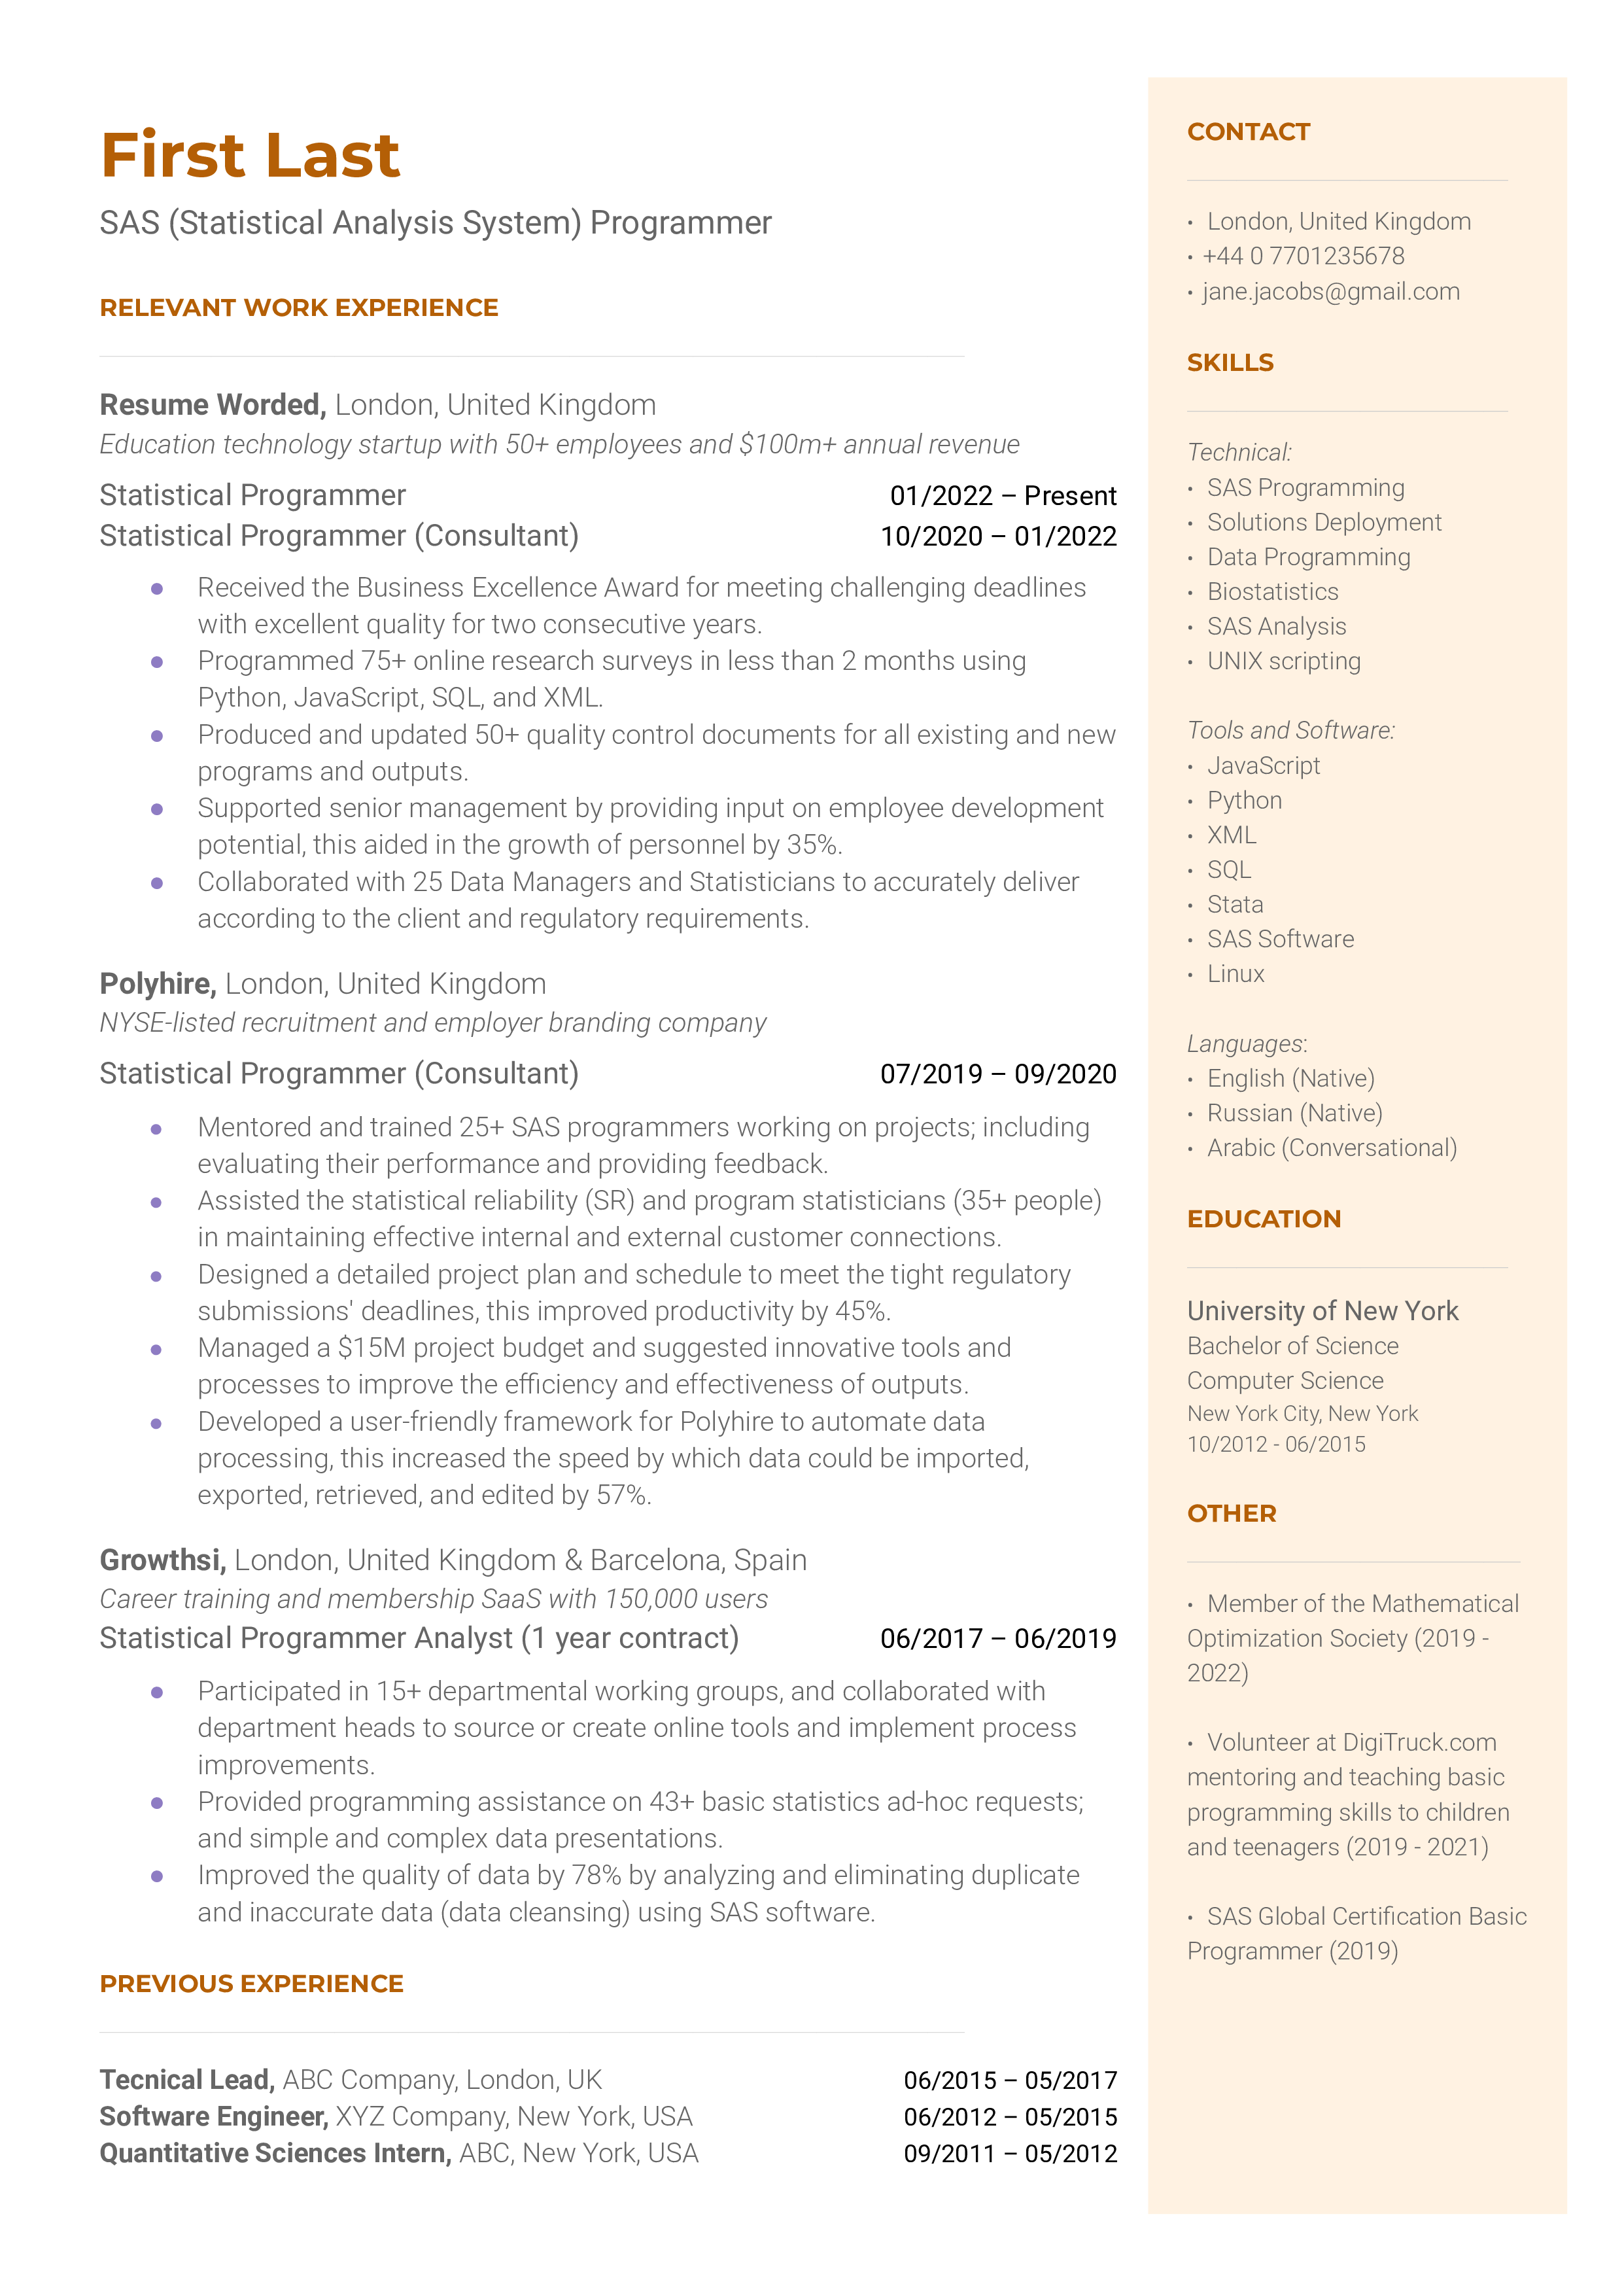 A SAS (Statistical Analysis System) Programmer template that emphasizes work experience